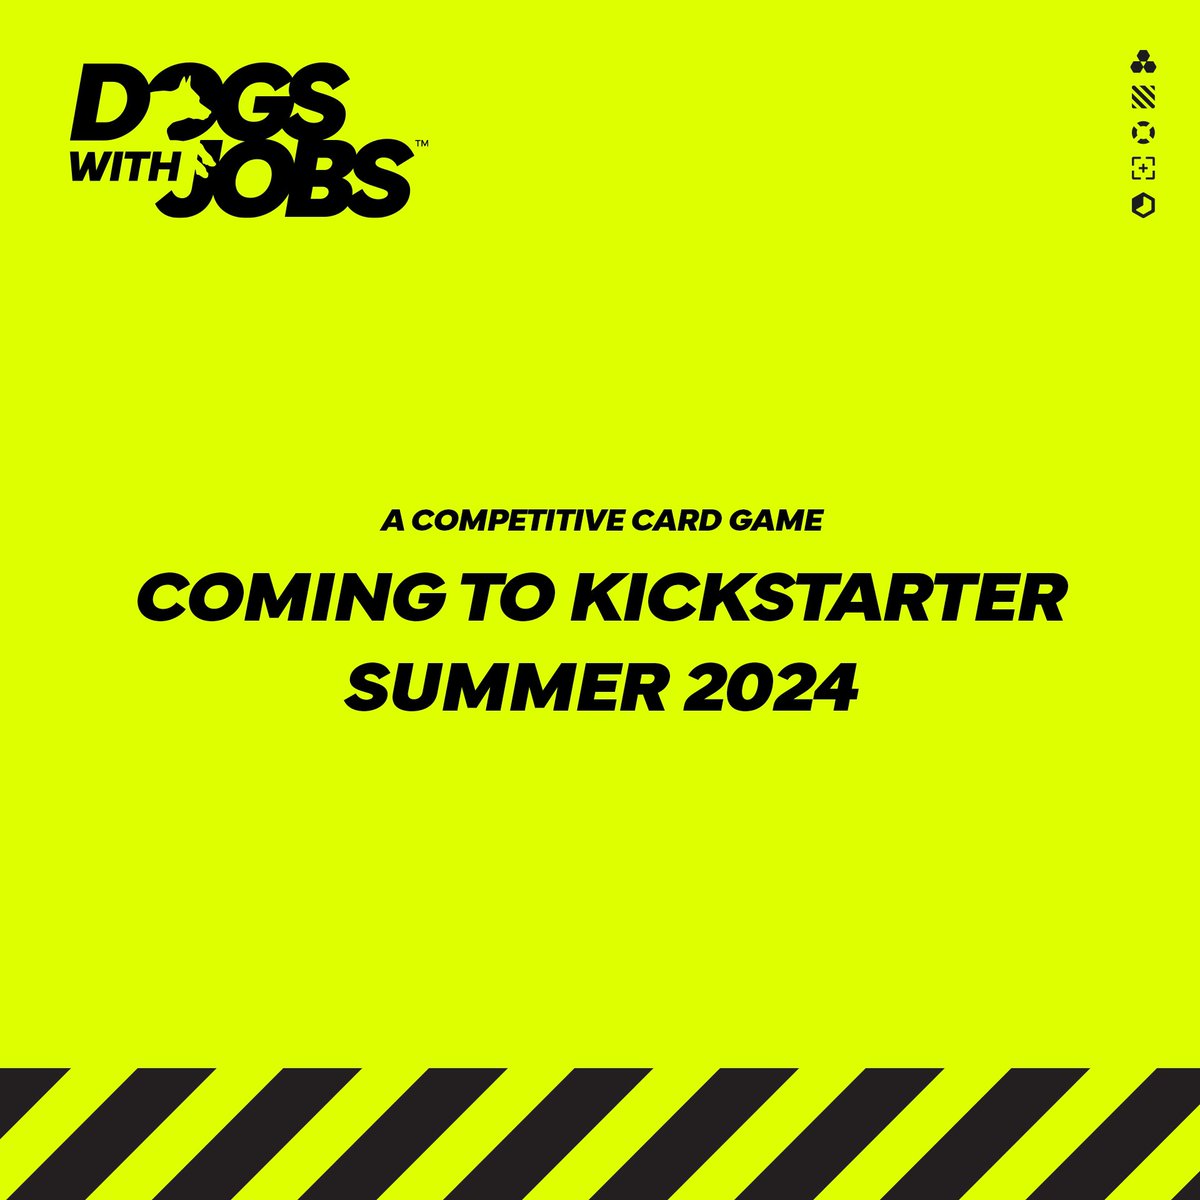 Next Dogs With Jobs artwork - the Guard Dog, a Doberman. Much fierce, many guard. Follow @itsdogswithjobs for more details!